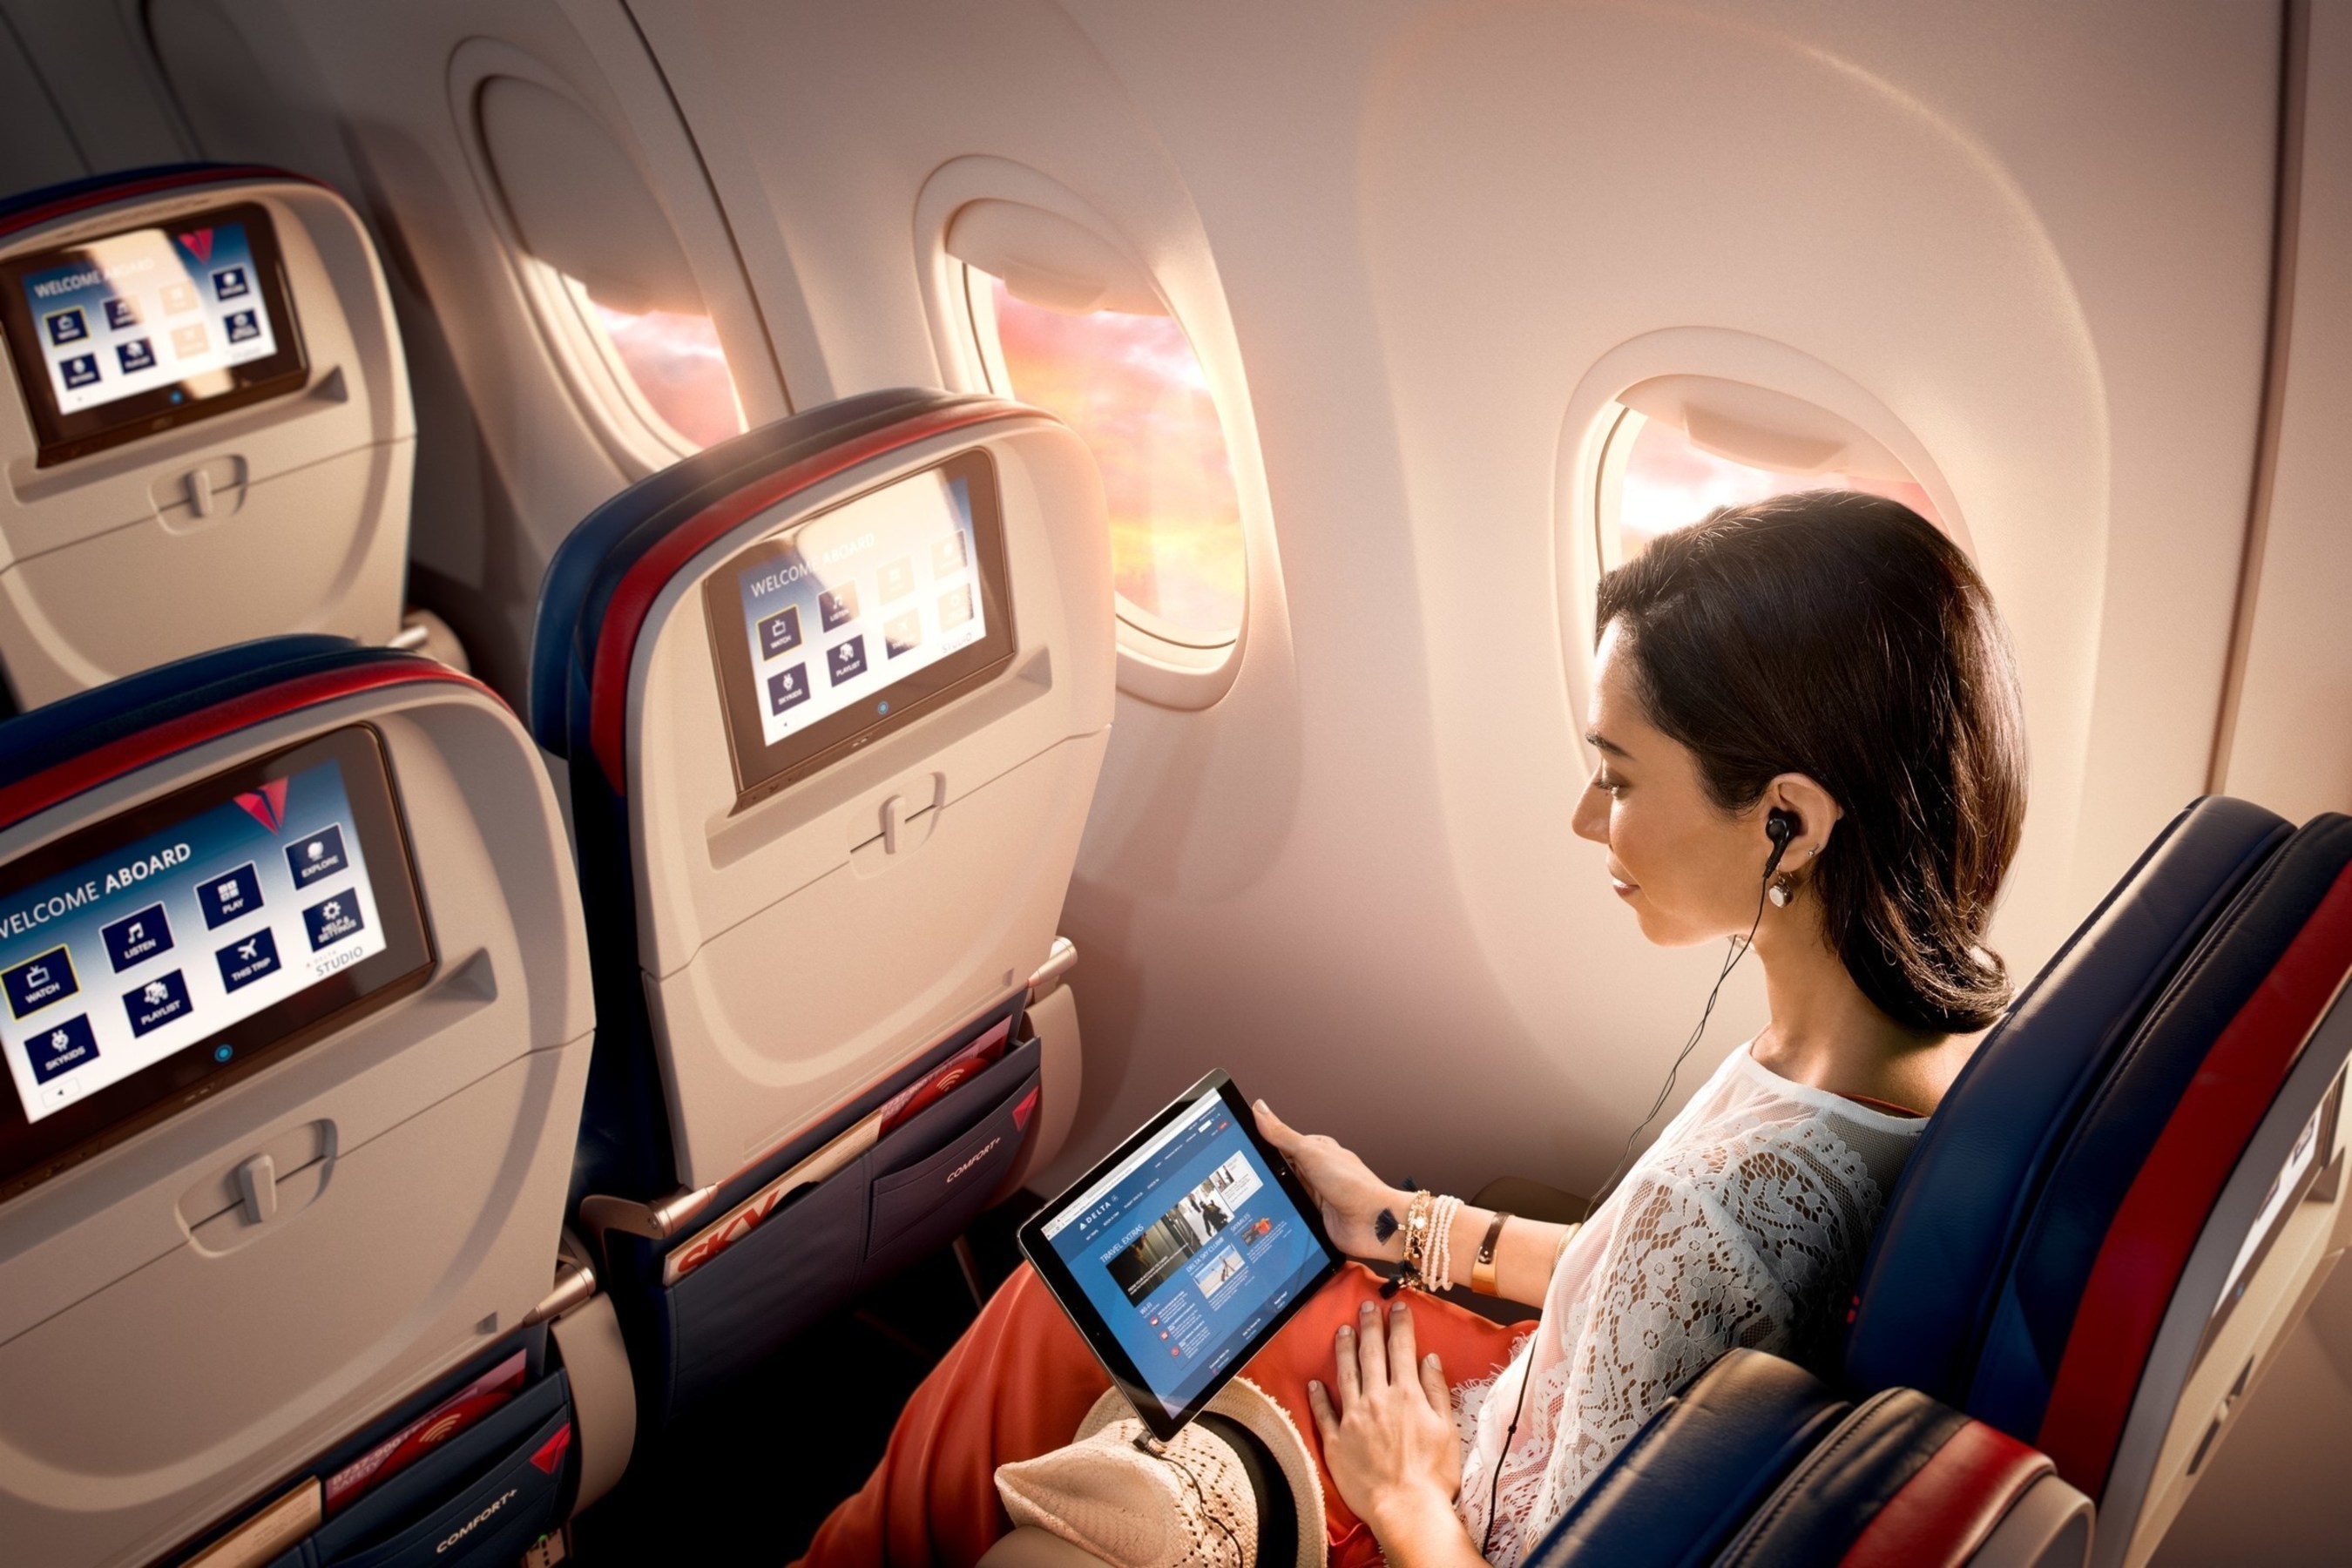 Delta Becomes Only U.S. Airline to Offer All In-Flight Entertainment For Free